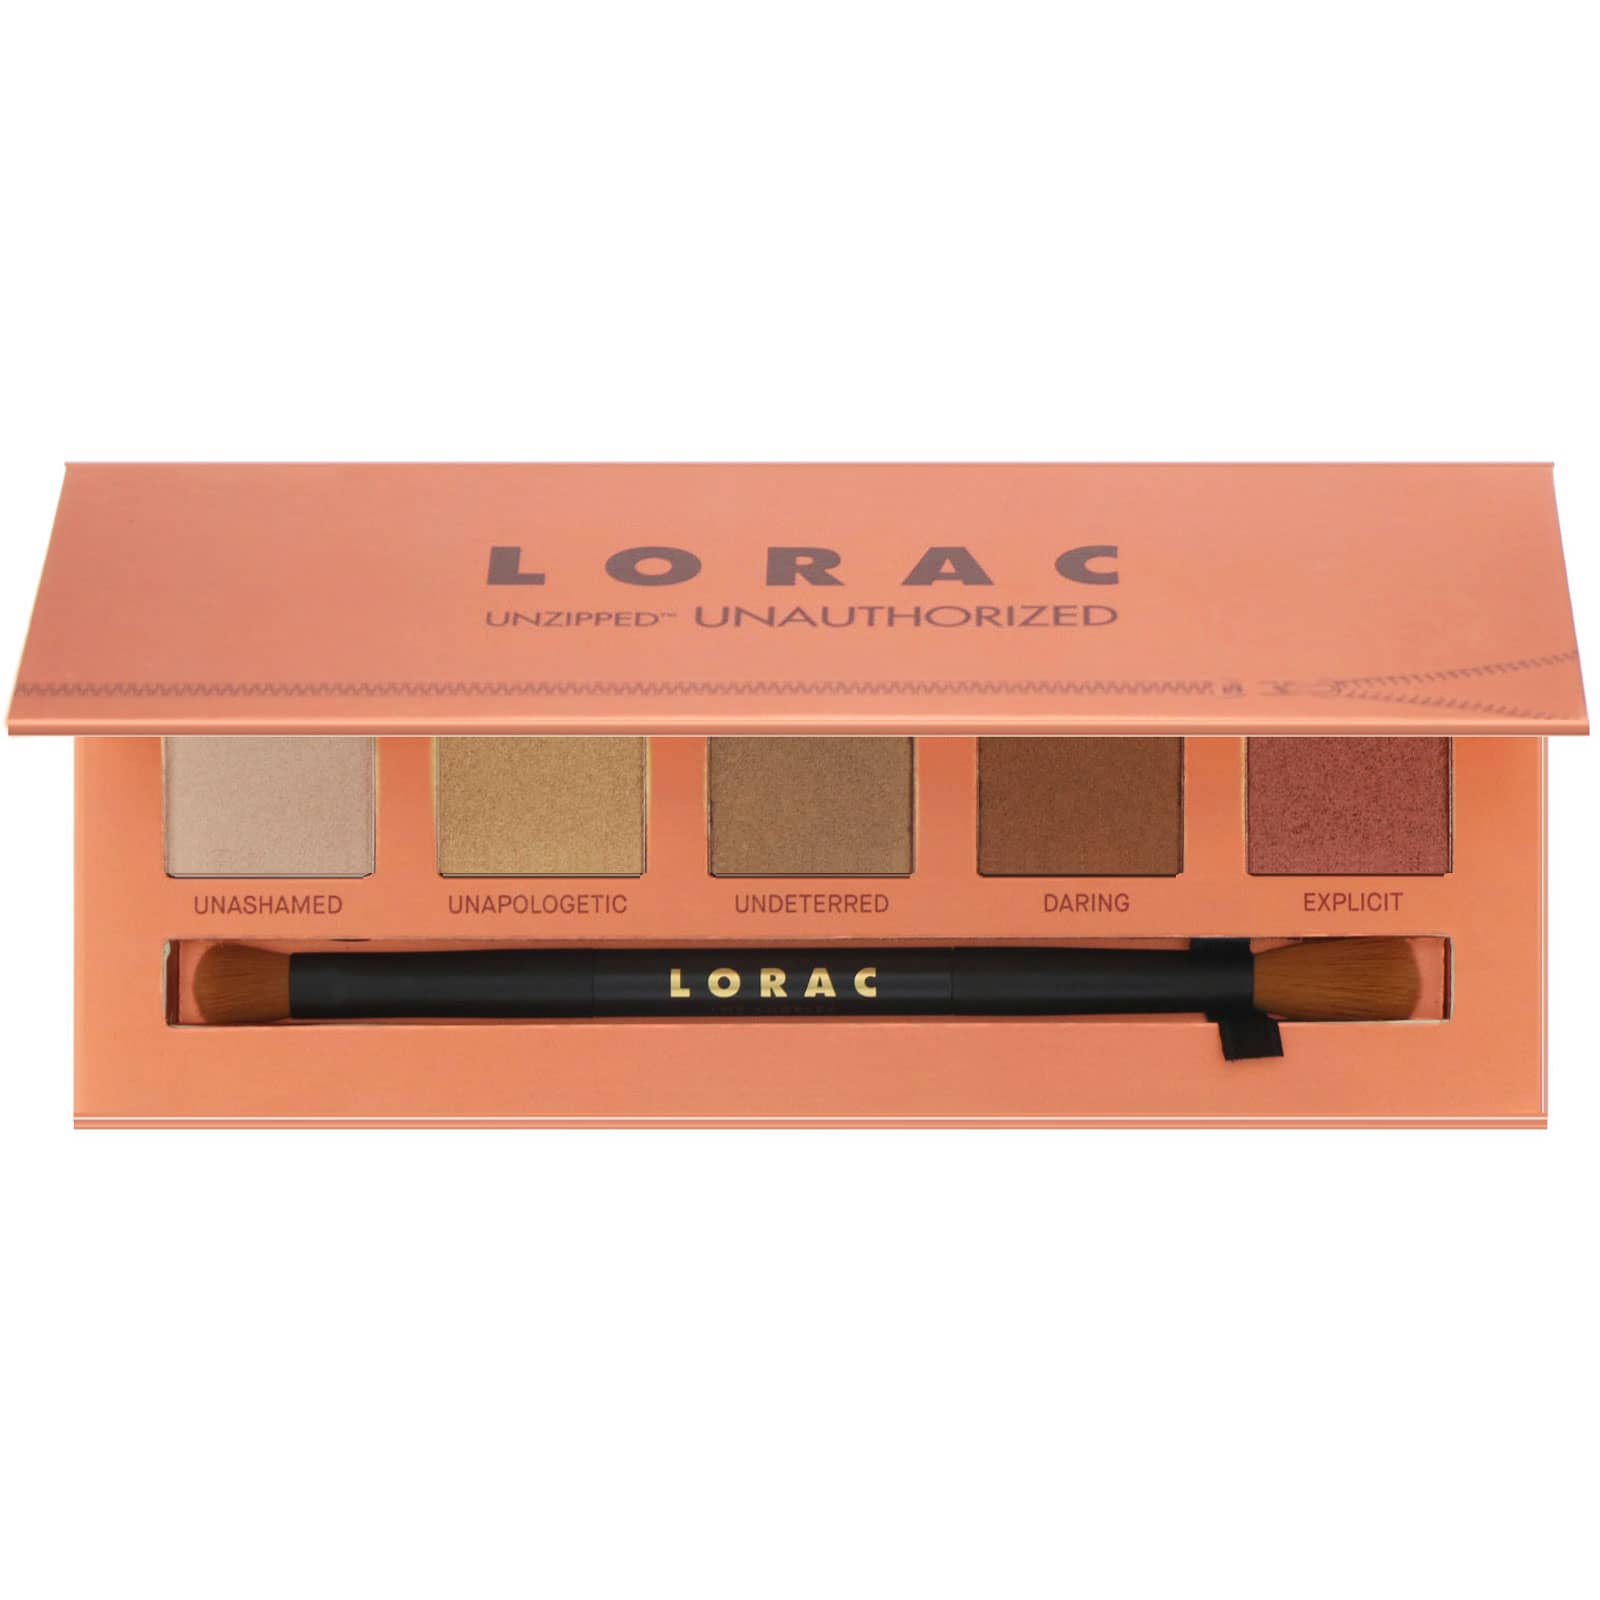 Lorac, Unzipped Unauthorized Eye Shadow Palette with Dual-Ended Brush